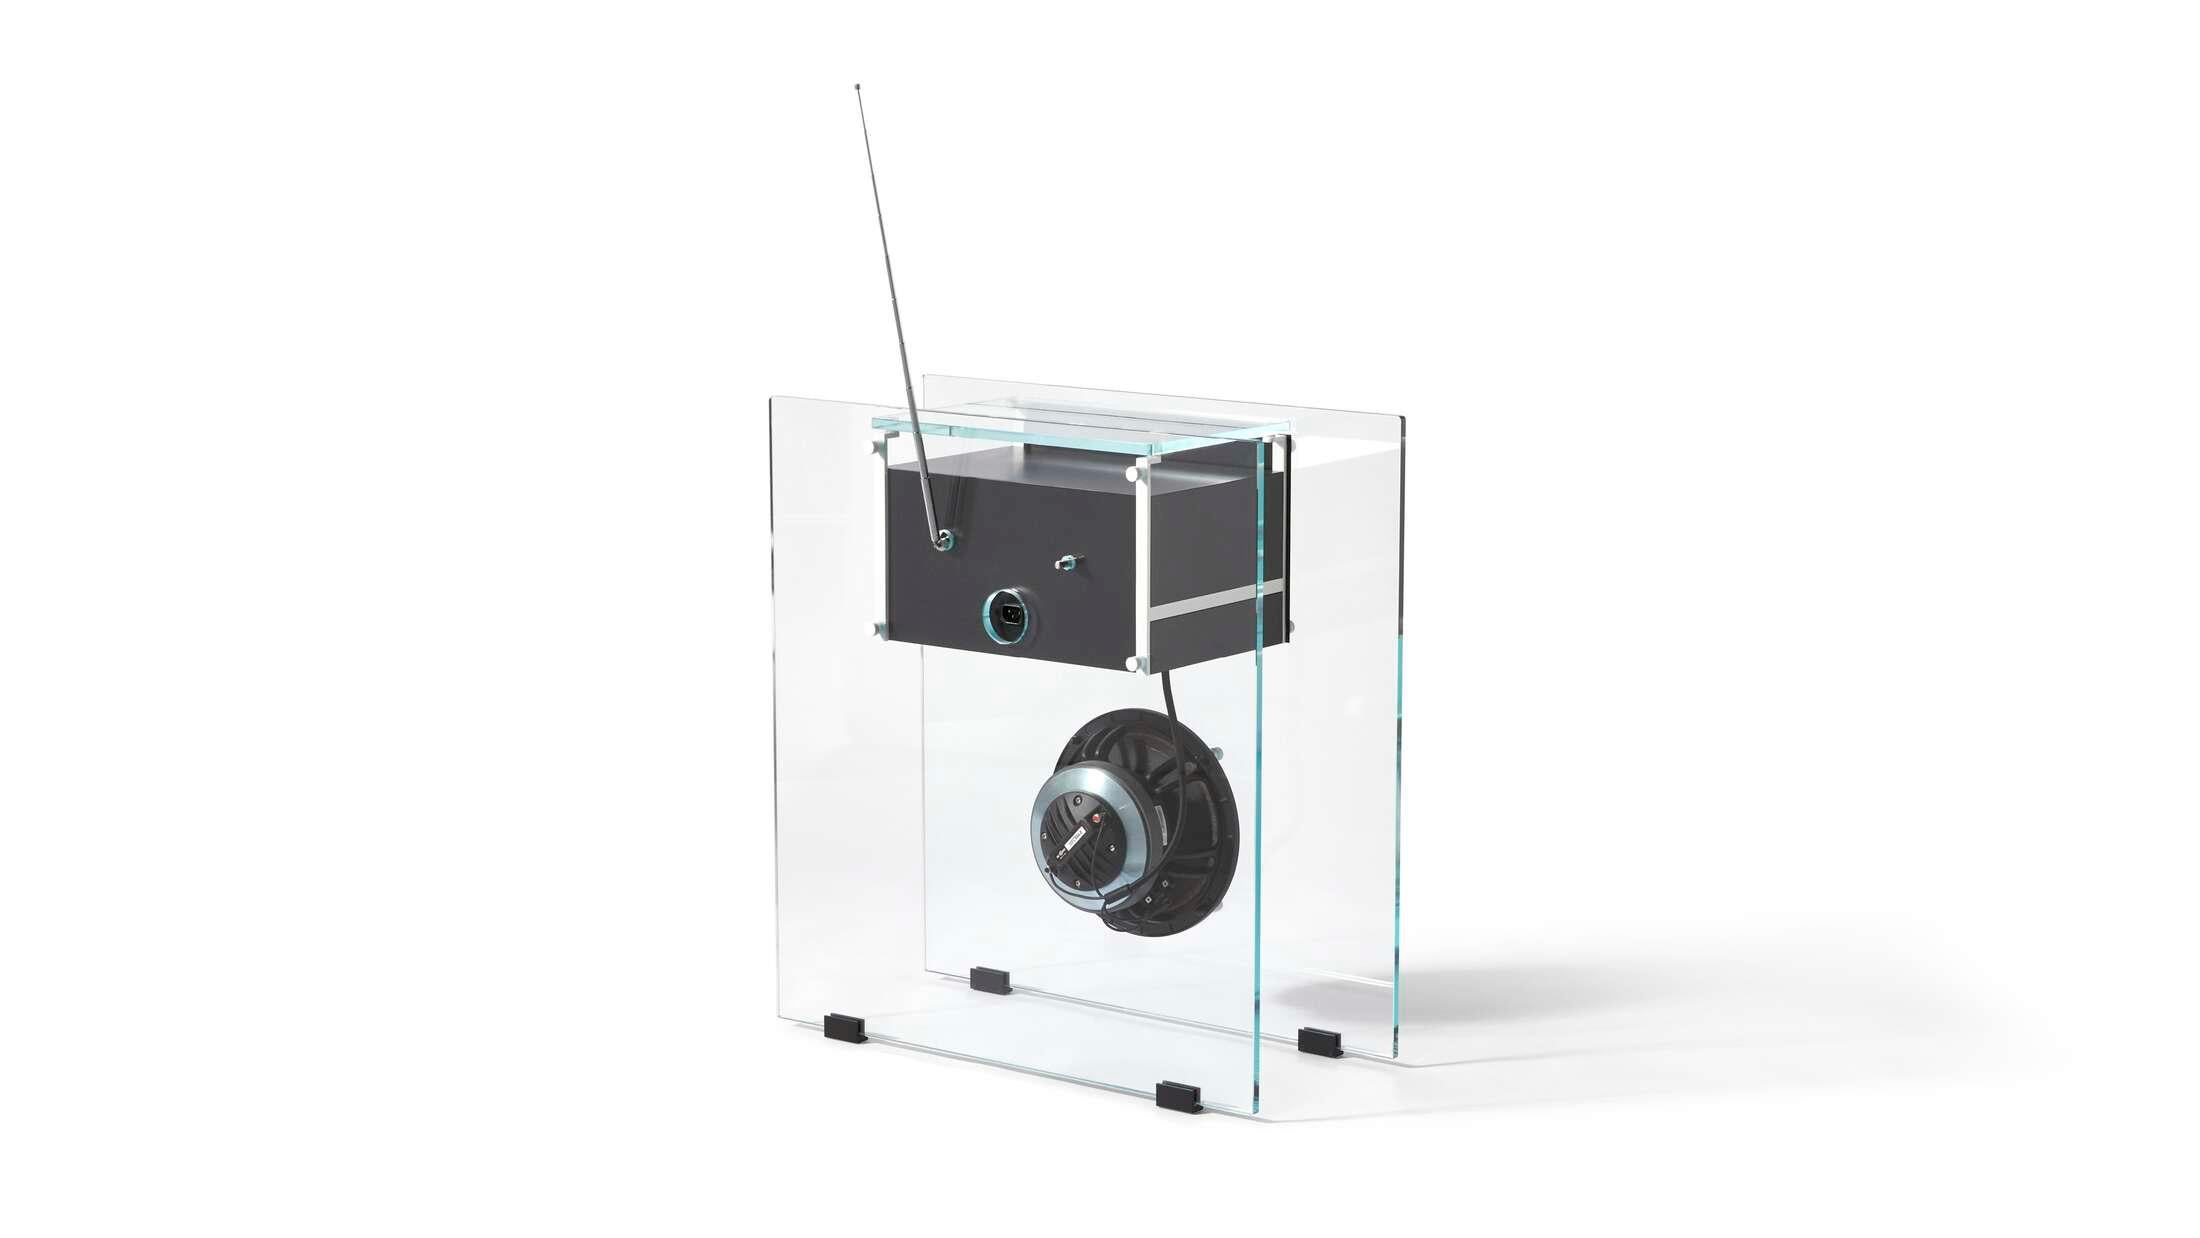 please note: 842 subwoofer wireless for clearglass-radio is currently not available. Radio is available separately though. Prices vary dependent on the material/color/model of the product.

Radio in Cristallo station by Franco Albini in 1938.